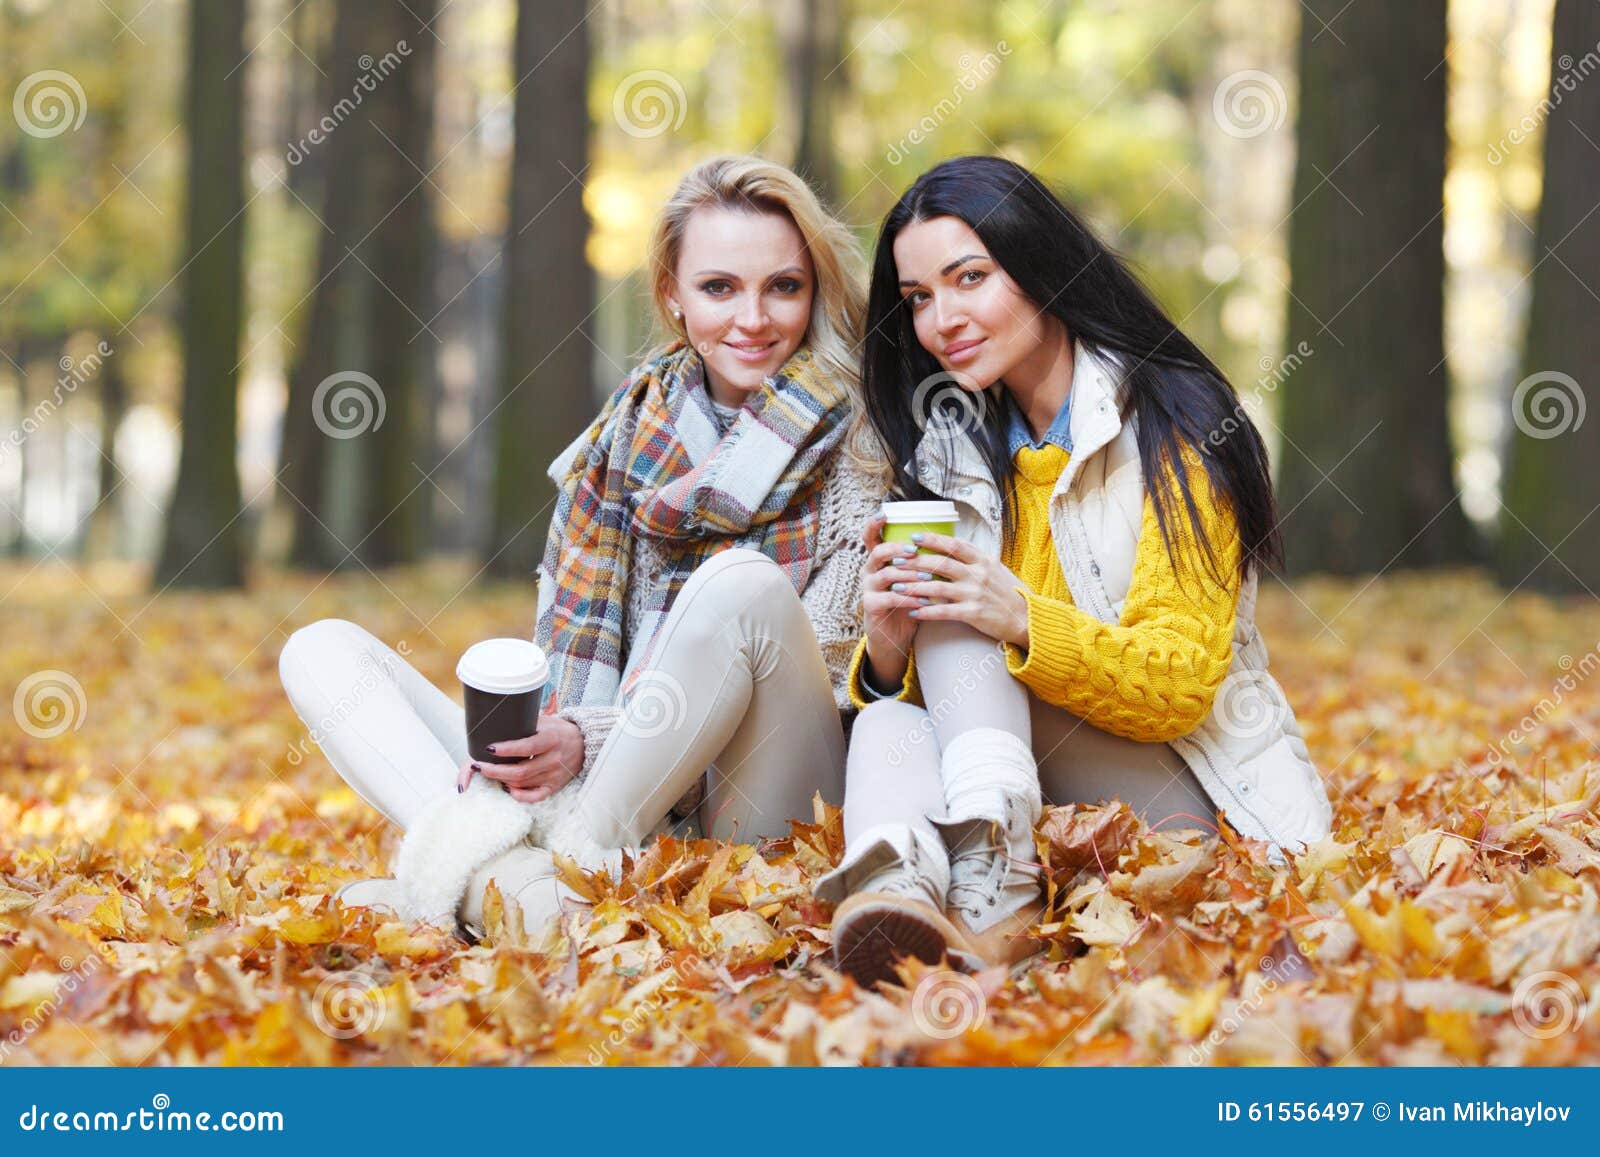 Friends with Coffee in Park Stock Image - Image of yellow, nature: 61556497